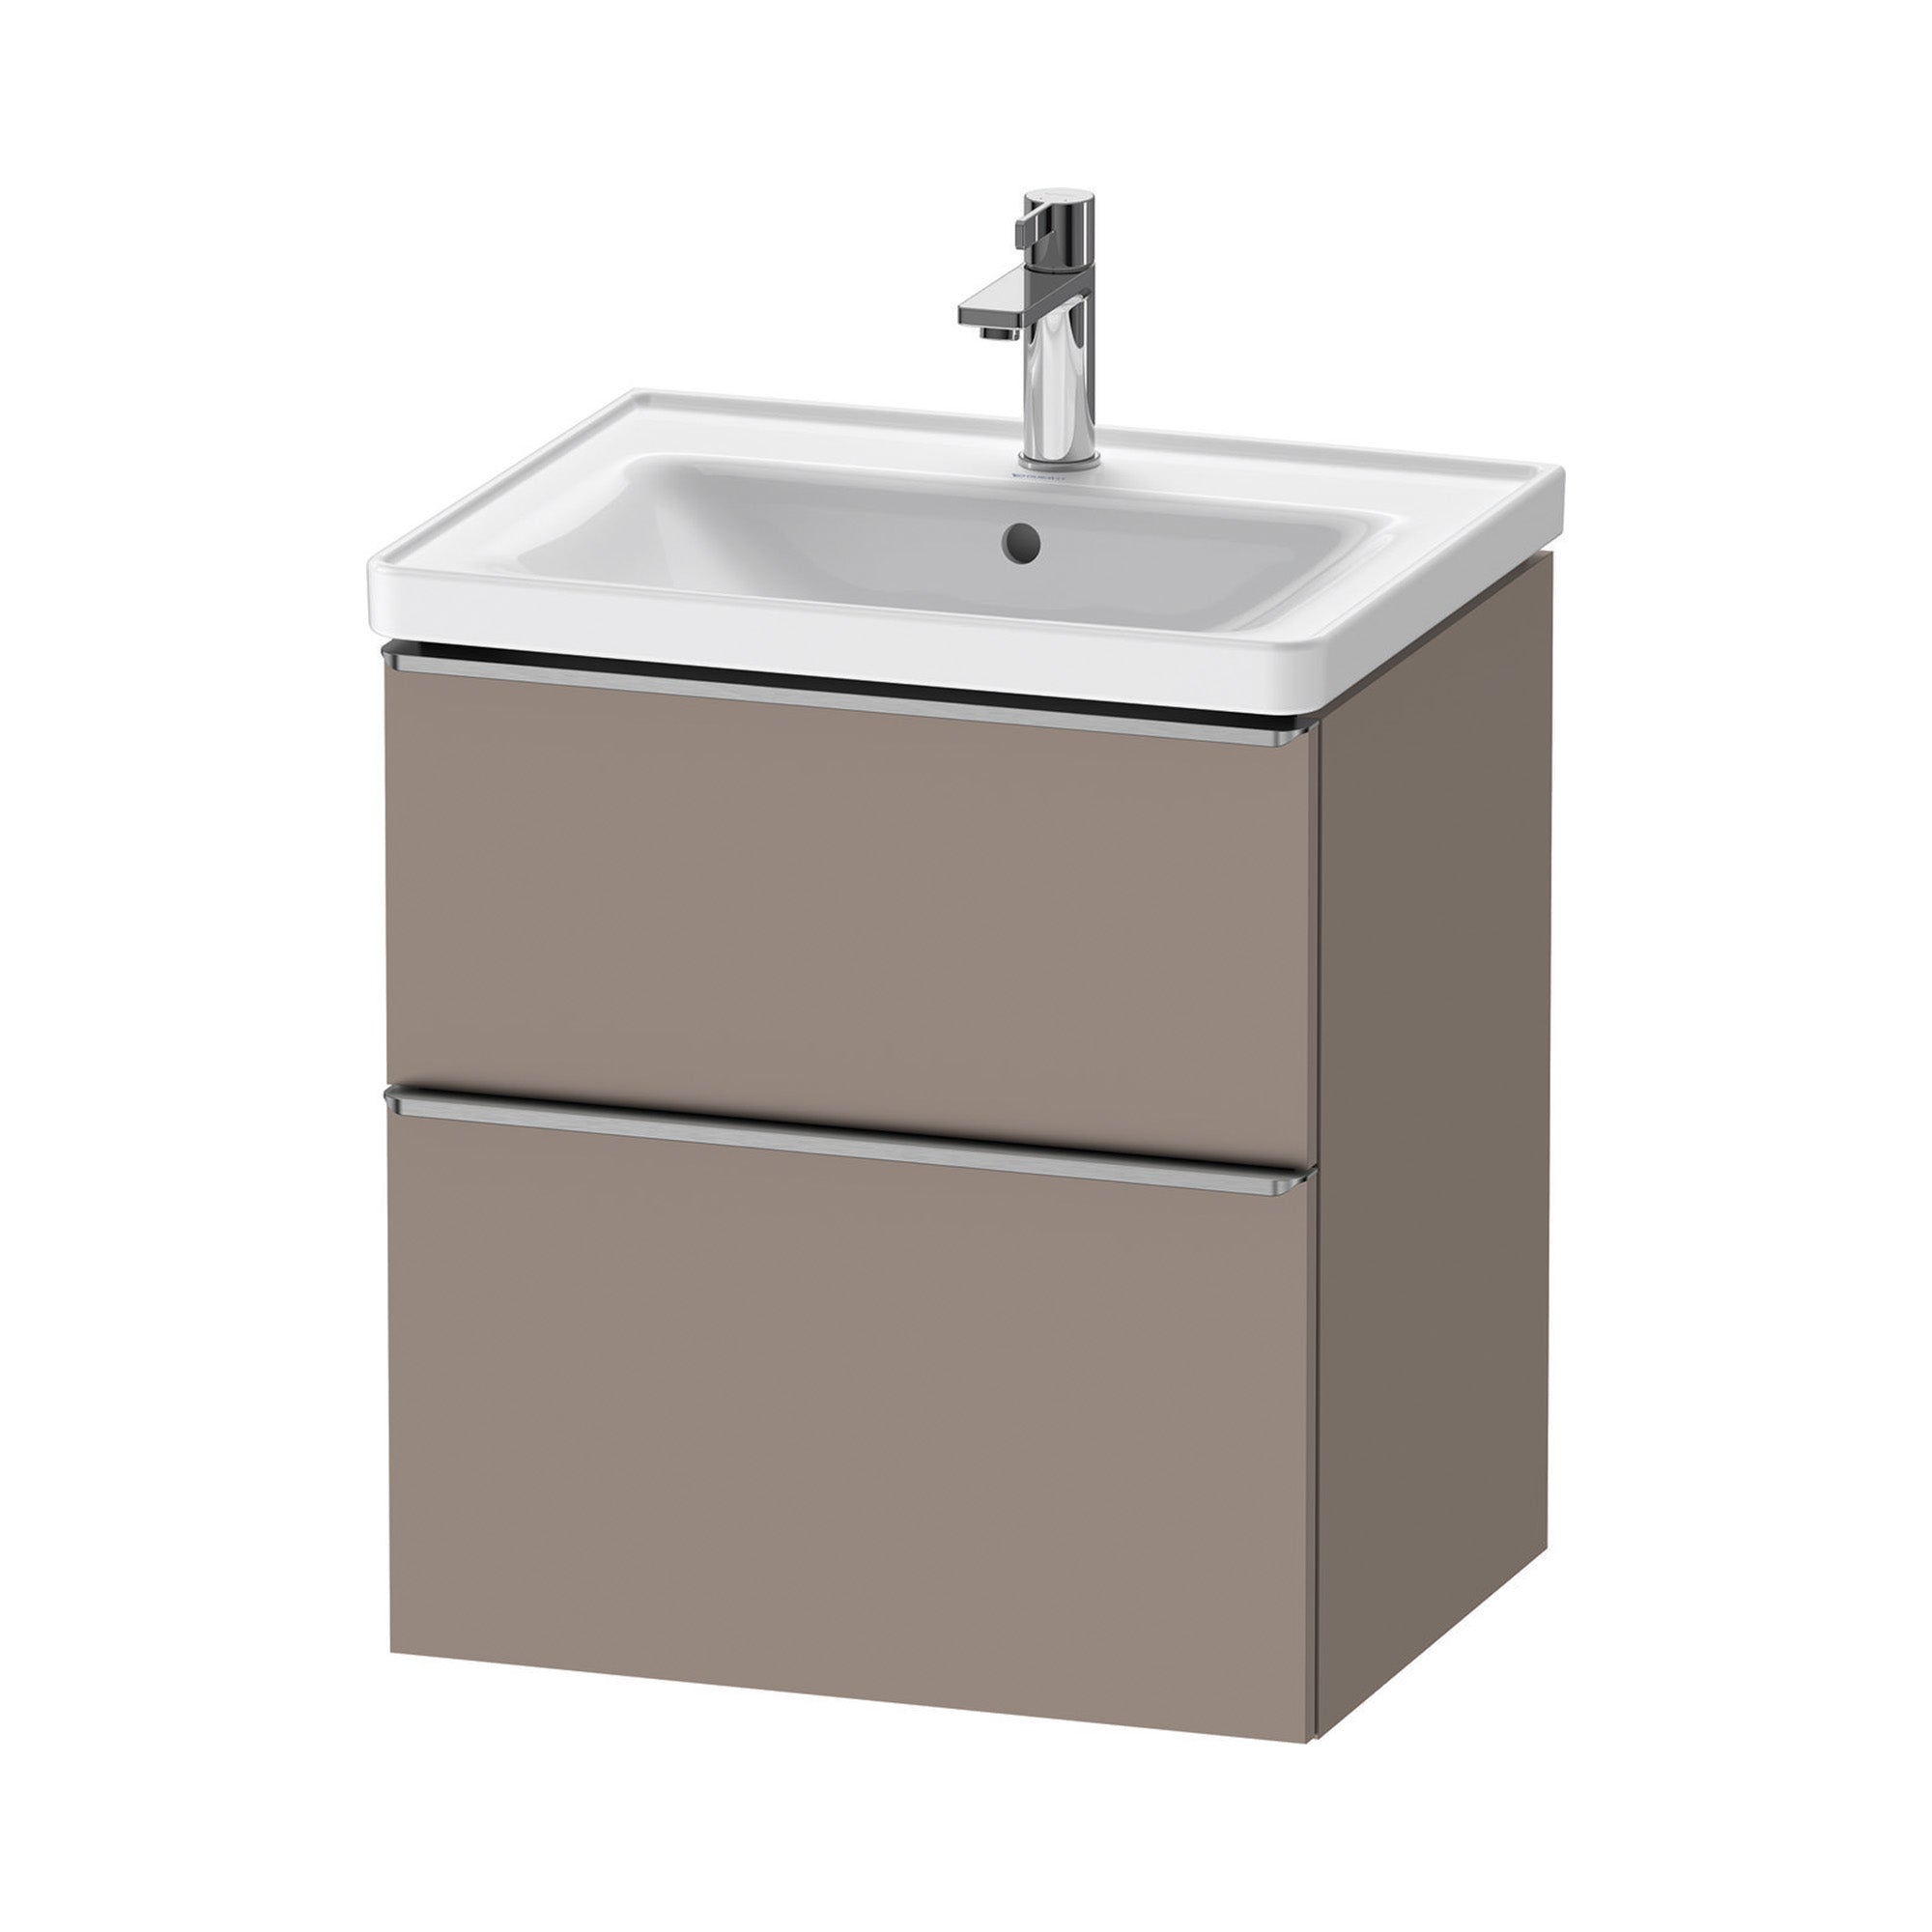 duravit d-neo 600 wall mounted vanity unit with d-neo basin basalt stainless steel handles